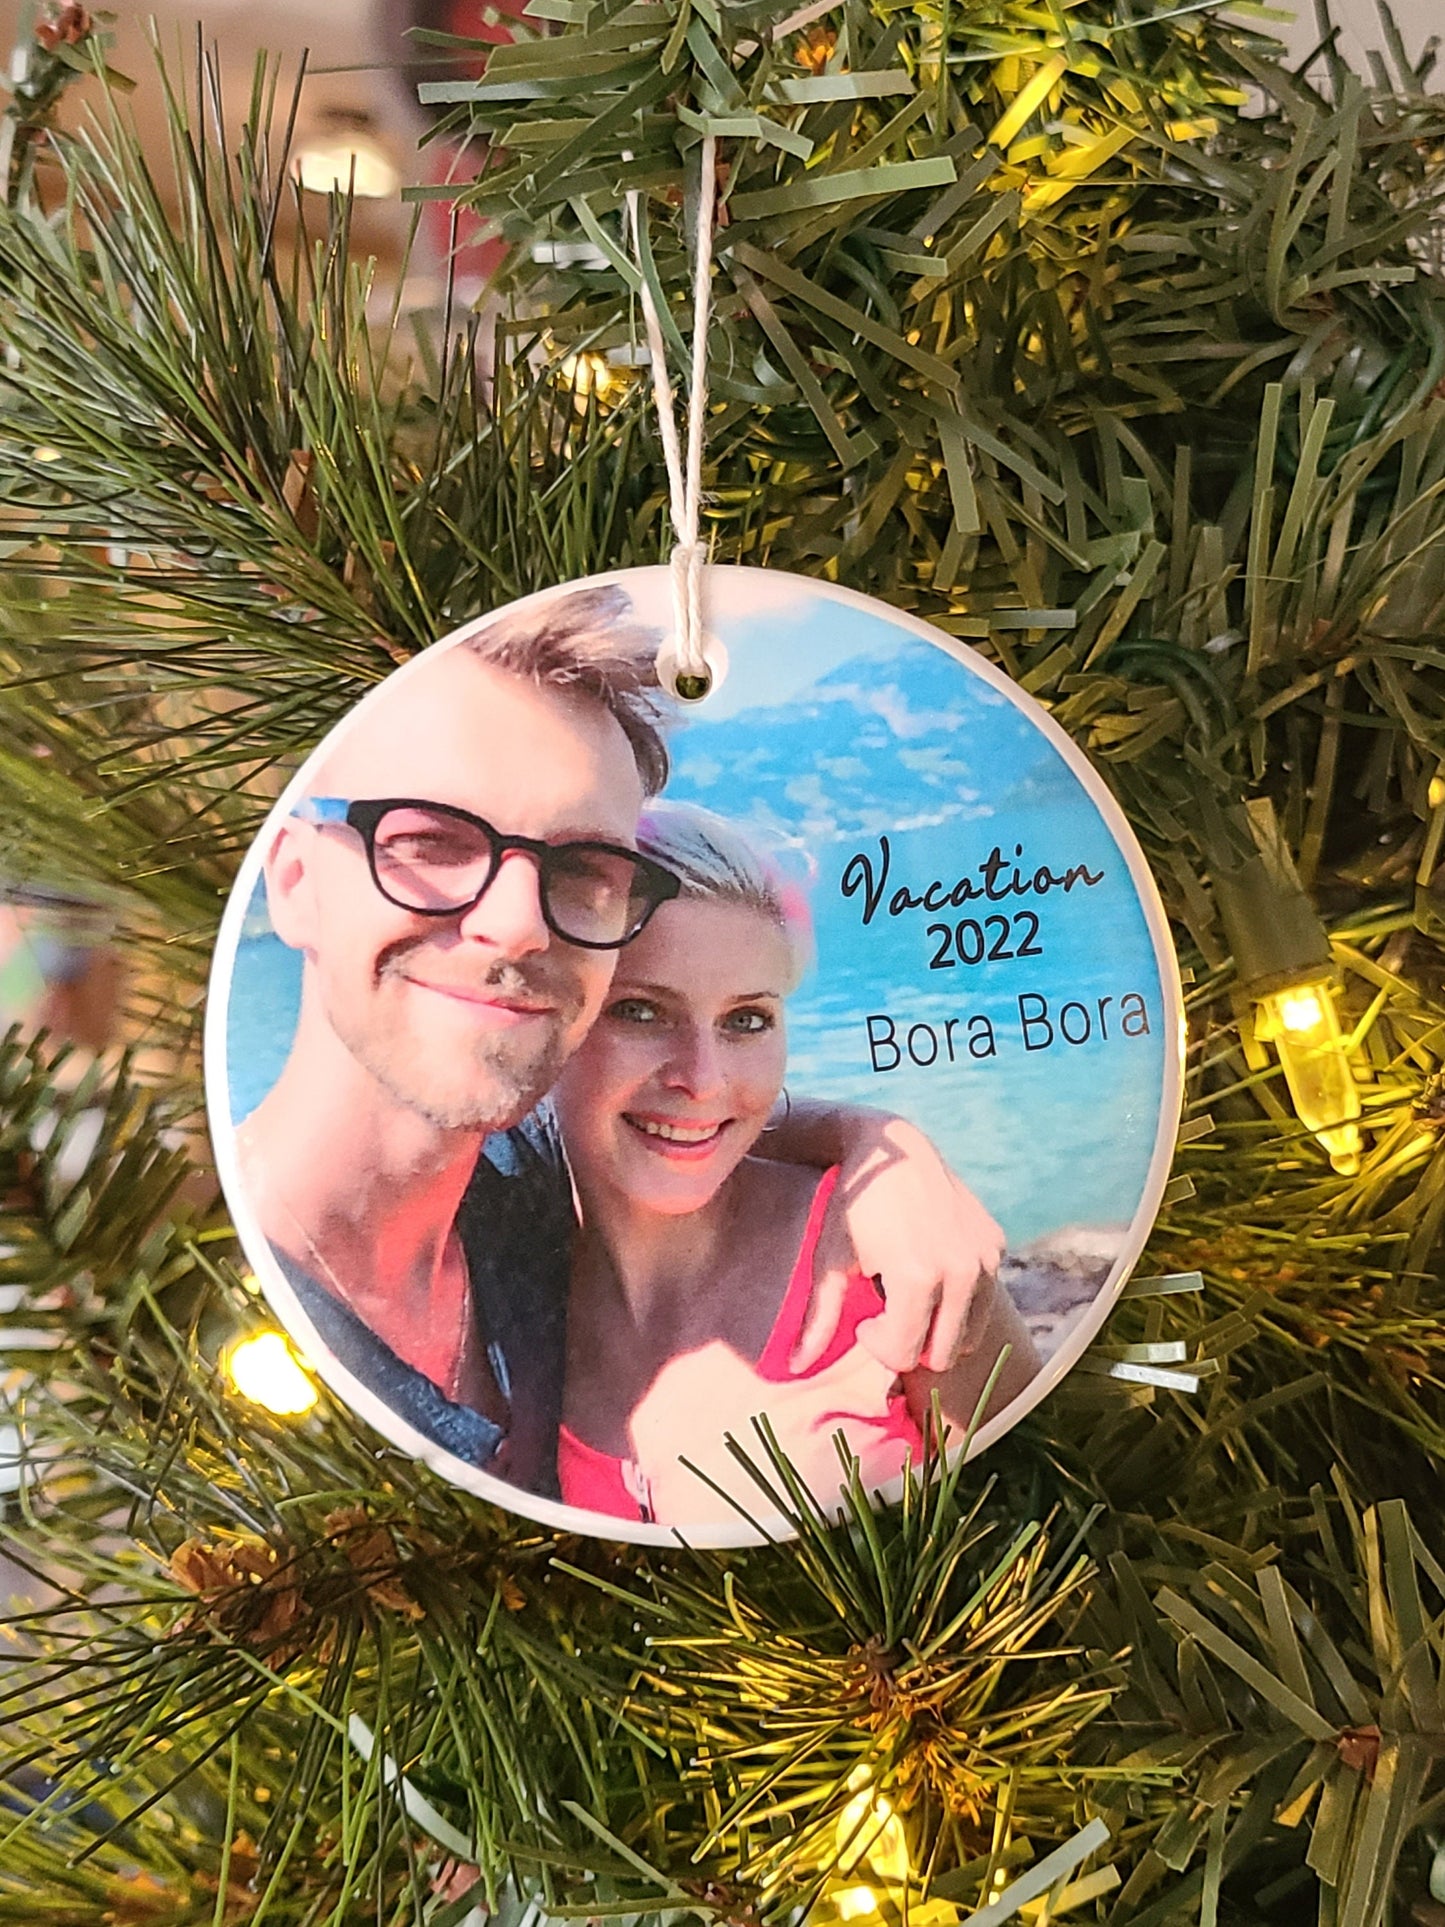 Ornament Vacation, Beach Ornament, Vacation Ornament, Travel, Trip - your vacation photo with destination